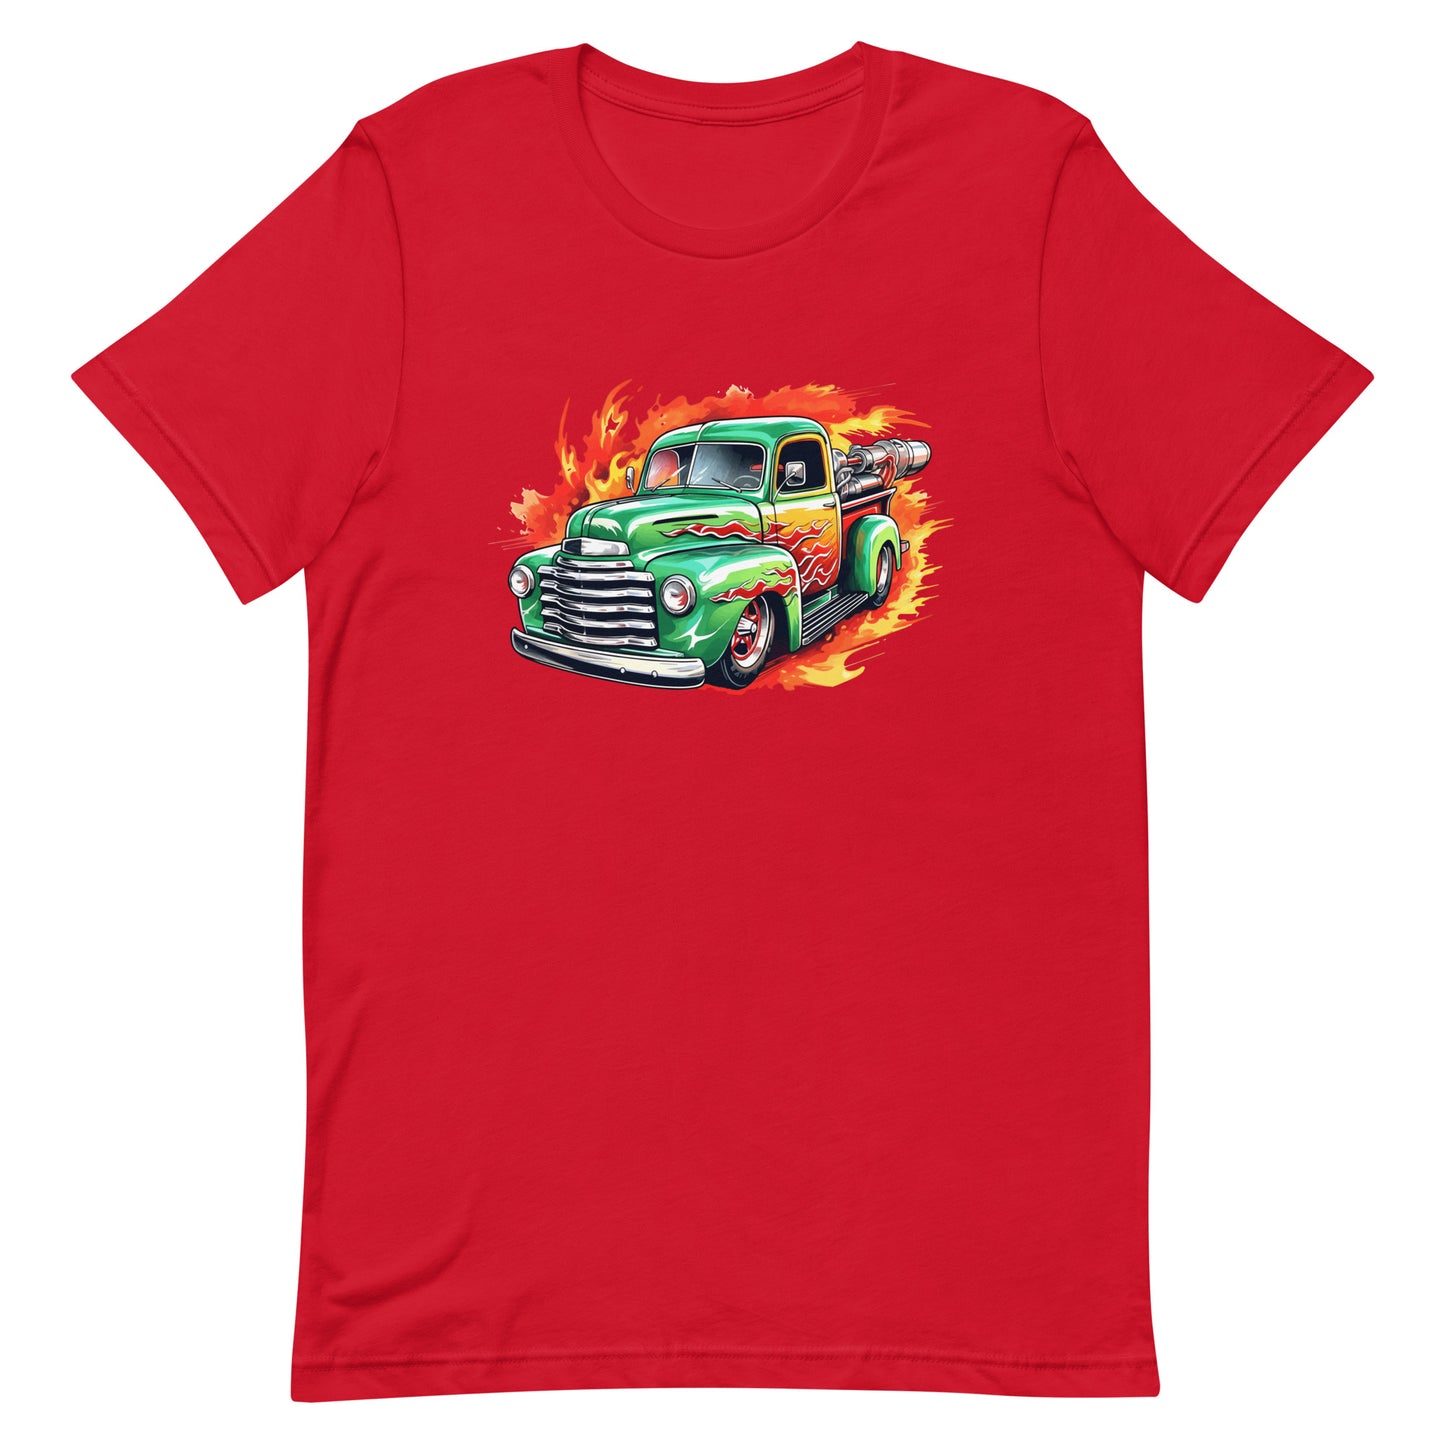 American classic pickup, Truck in fire, Rocket car in flame, Fiery road, Hot rod, Speed and fire - Unisex t-shirt